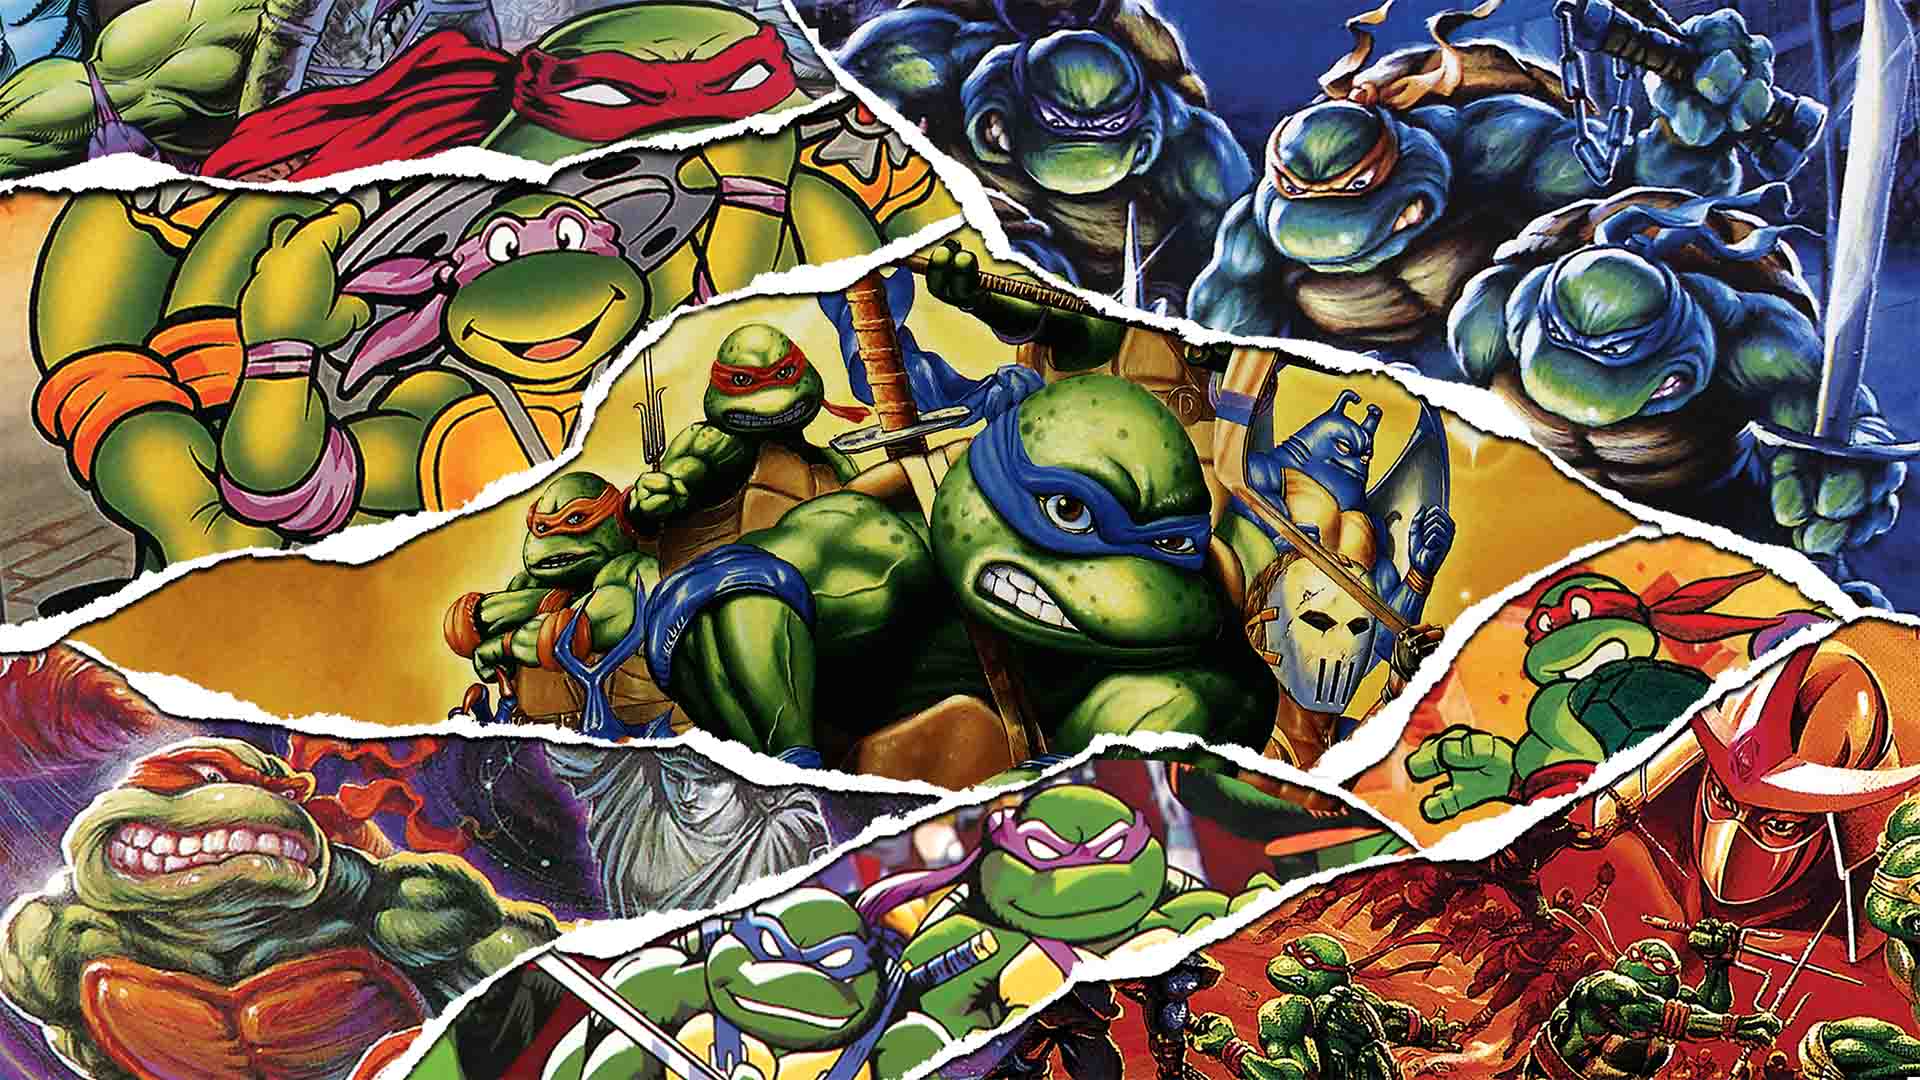 Teenage Mutant Ninja Turtles vs Street Fighter brings two icons of  nostalgia together this May